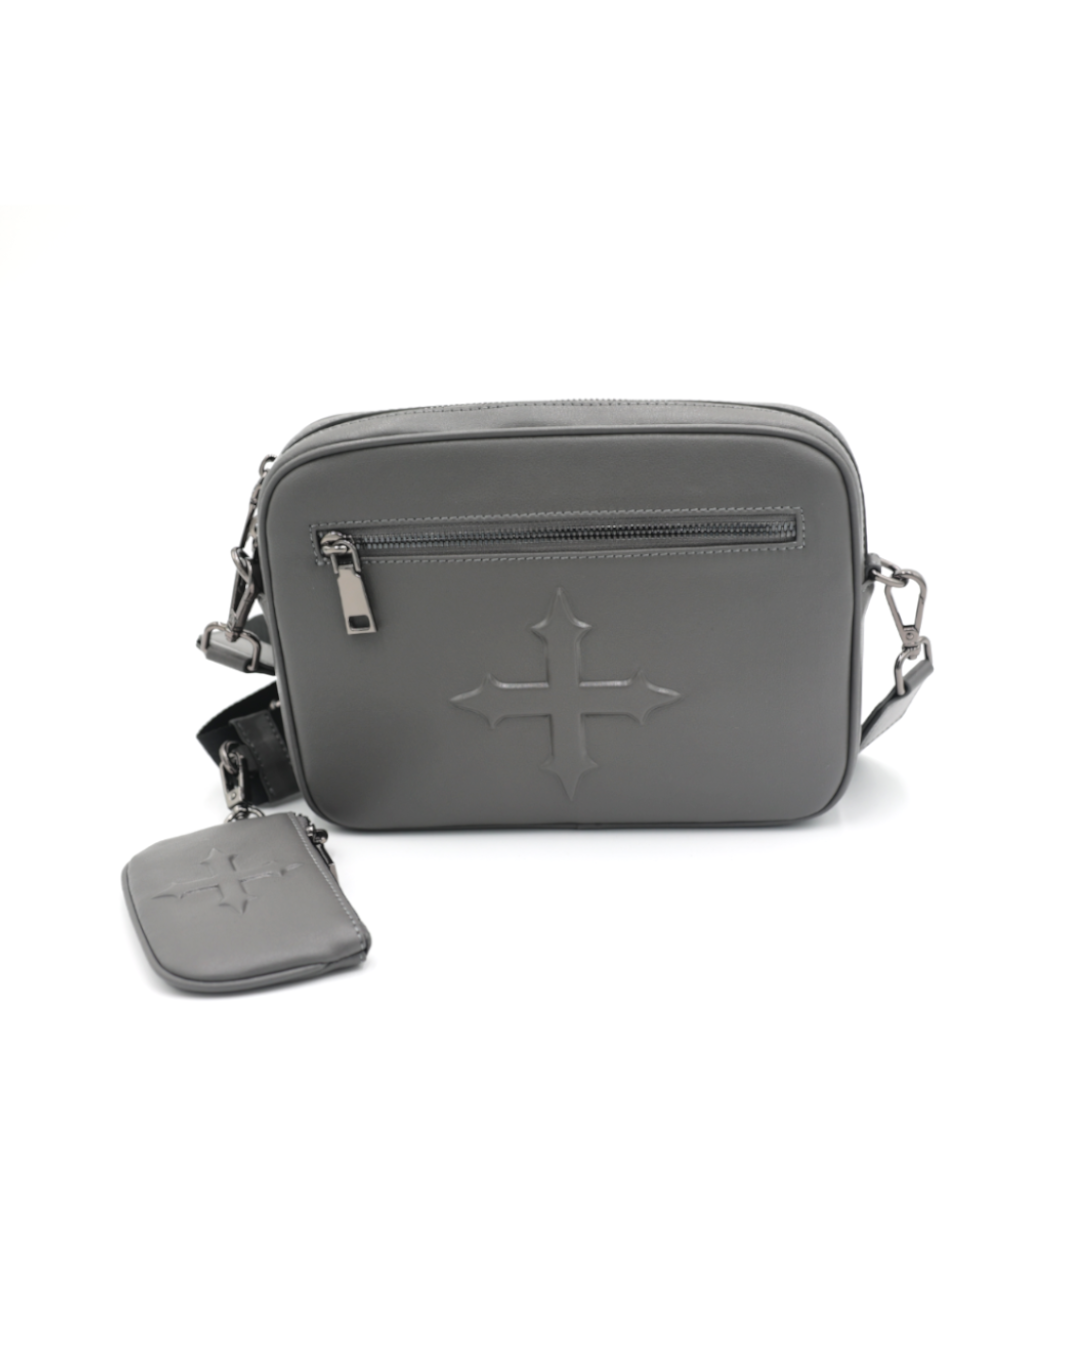 EVOL+VE 'FROM SIMPLE TO COMPLEX' LEATHER SIDE BAG GREY